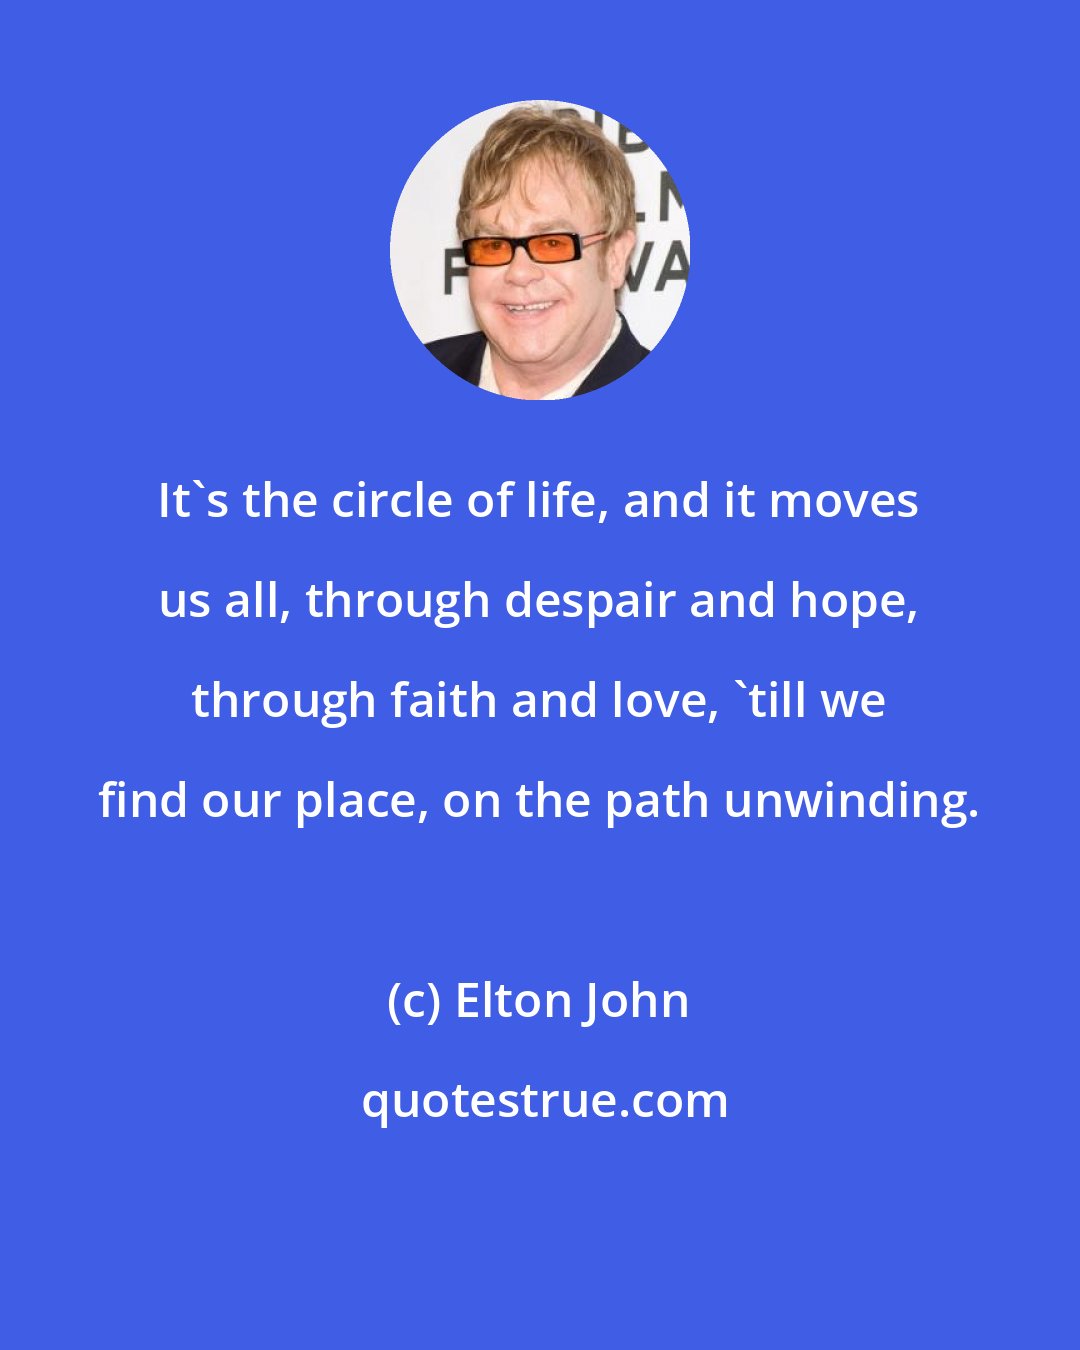 Elton John: It's the circle of life, and it moves us all, through despair and hope, through faith and love, 'till we find our place, on the path unwinding.